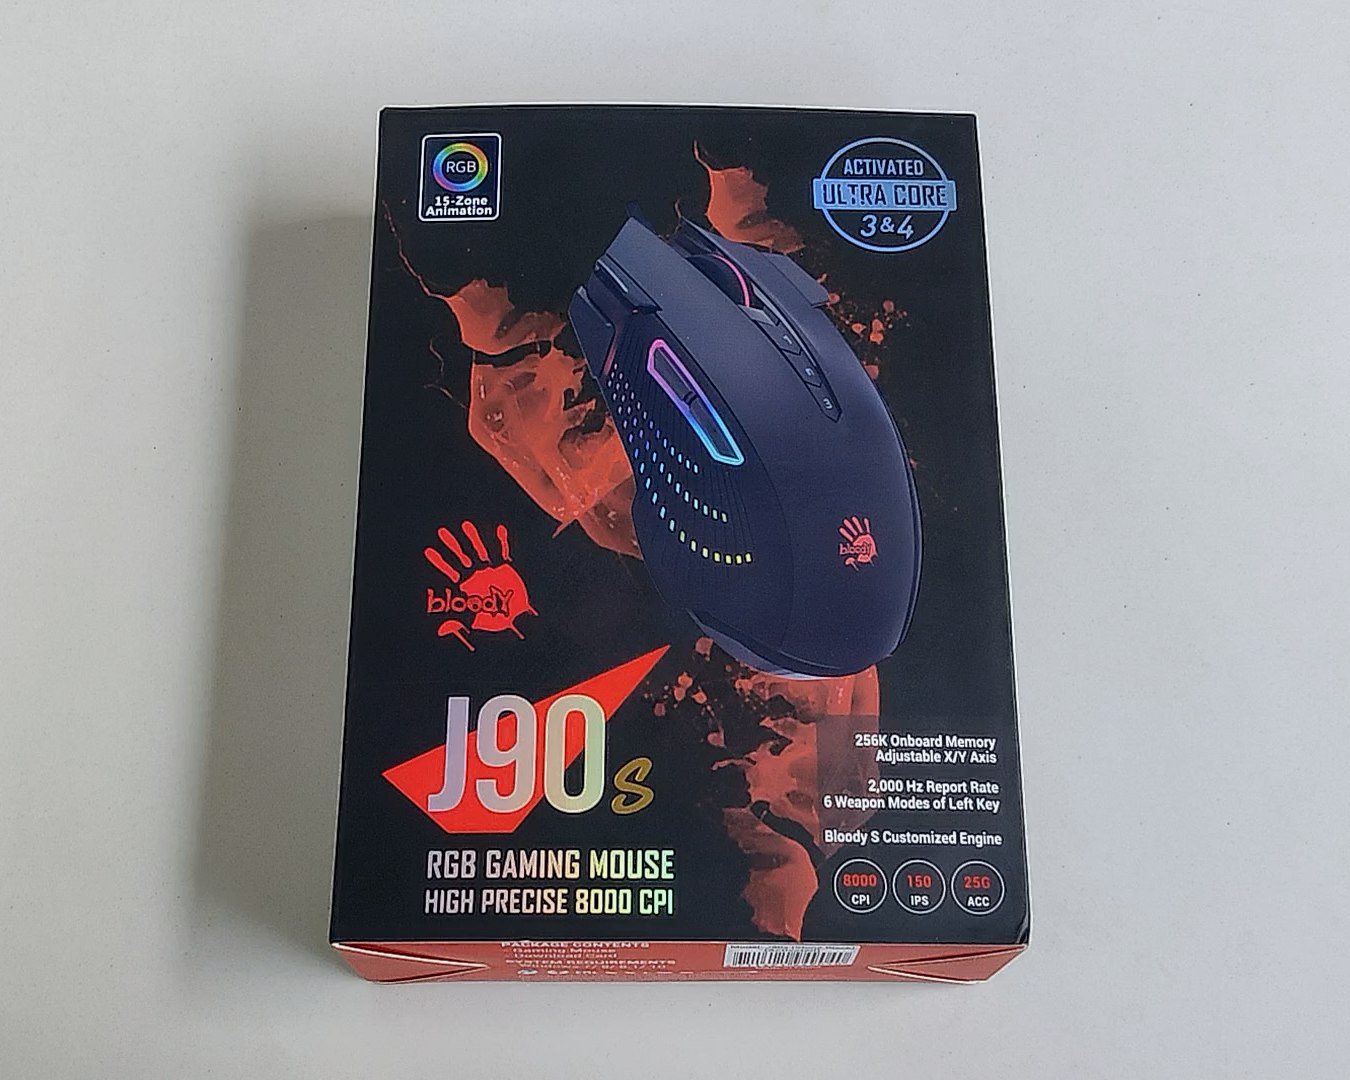 Bloody j90. Bloody j90s. Blood j90. Blacklisted device bloody mouse